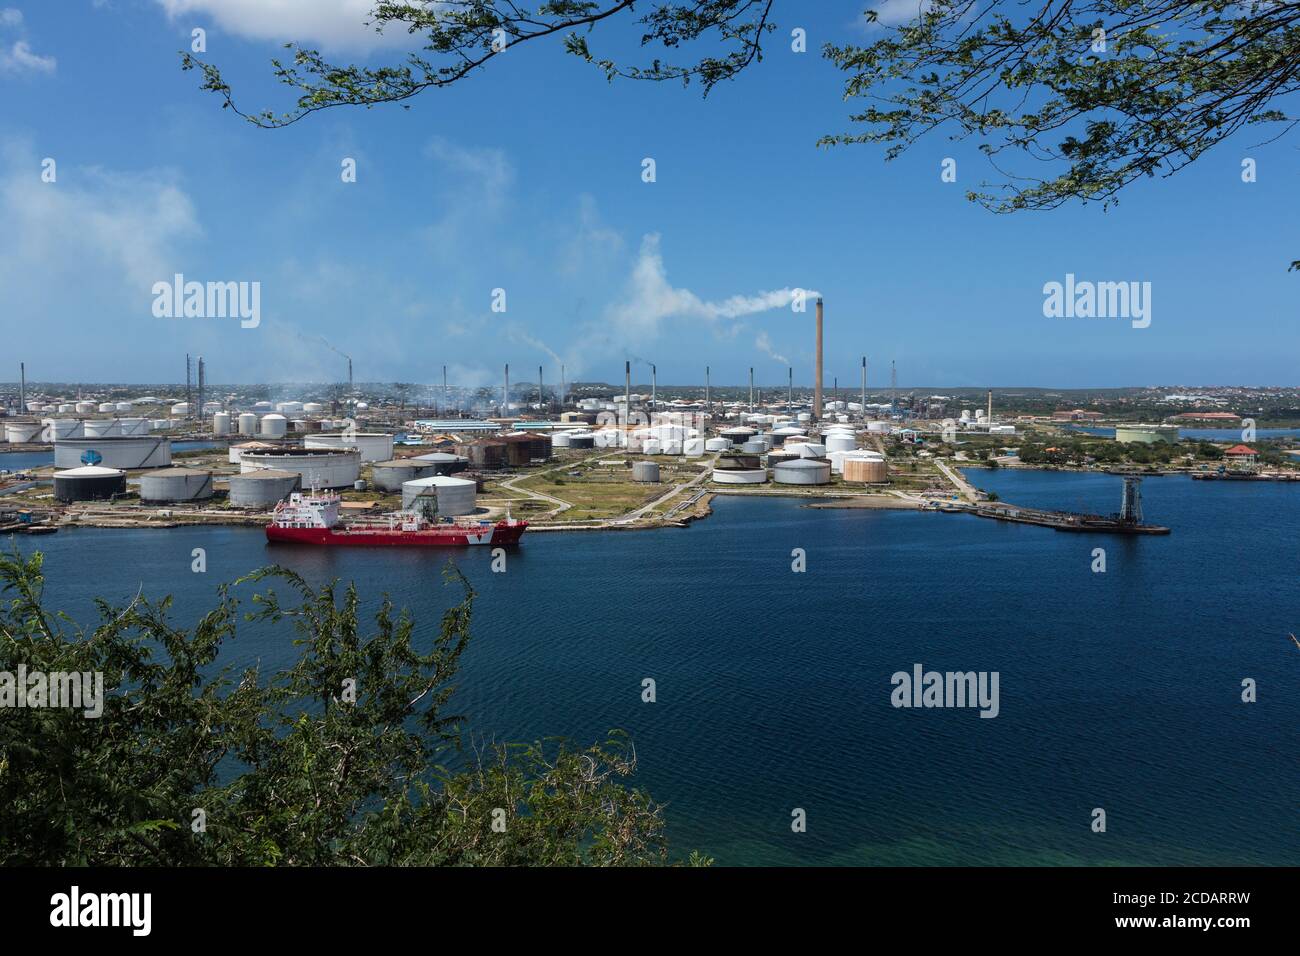 The Isla Oil Refinery in the harbor of Willemstad, capital of the Caribbean island nation of Curacao in the Schottegat lagoon, a large natural lagoon Stock Photo